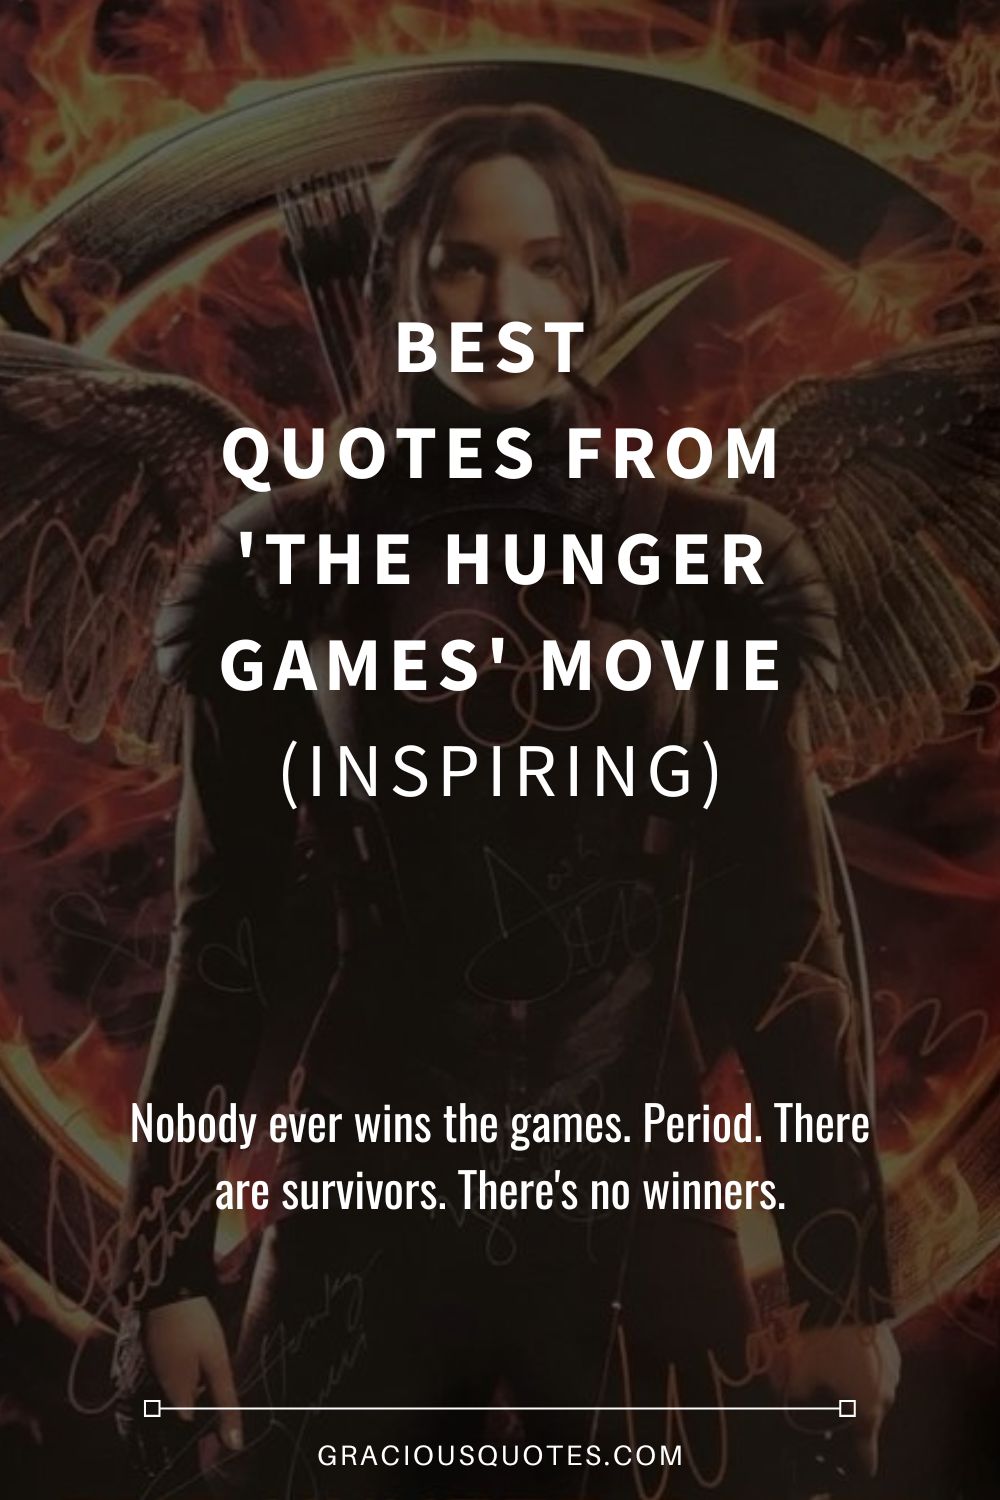 Best Quotes from 'The Hunger Games' Movie (INSPIRING) - Gracious Quotes